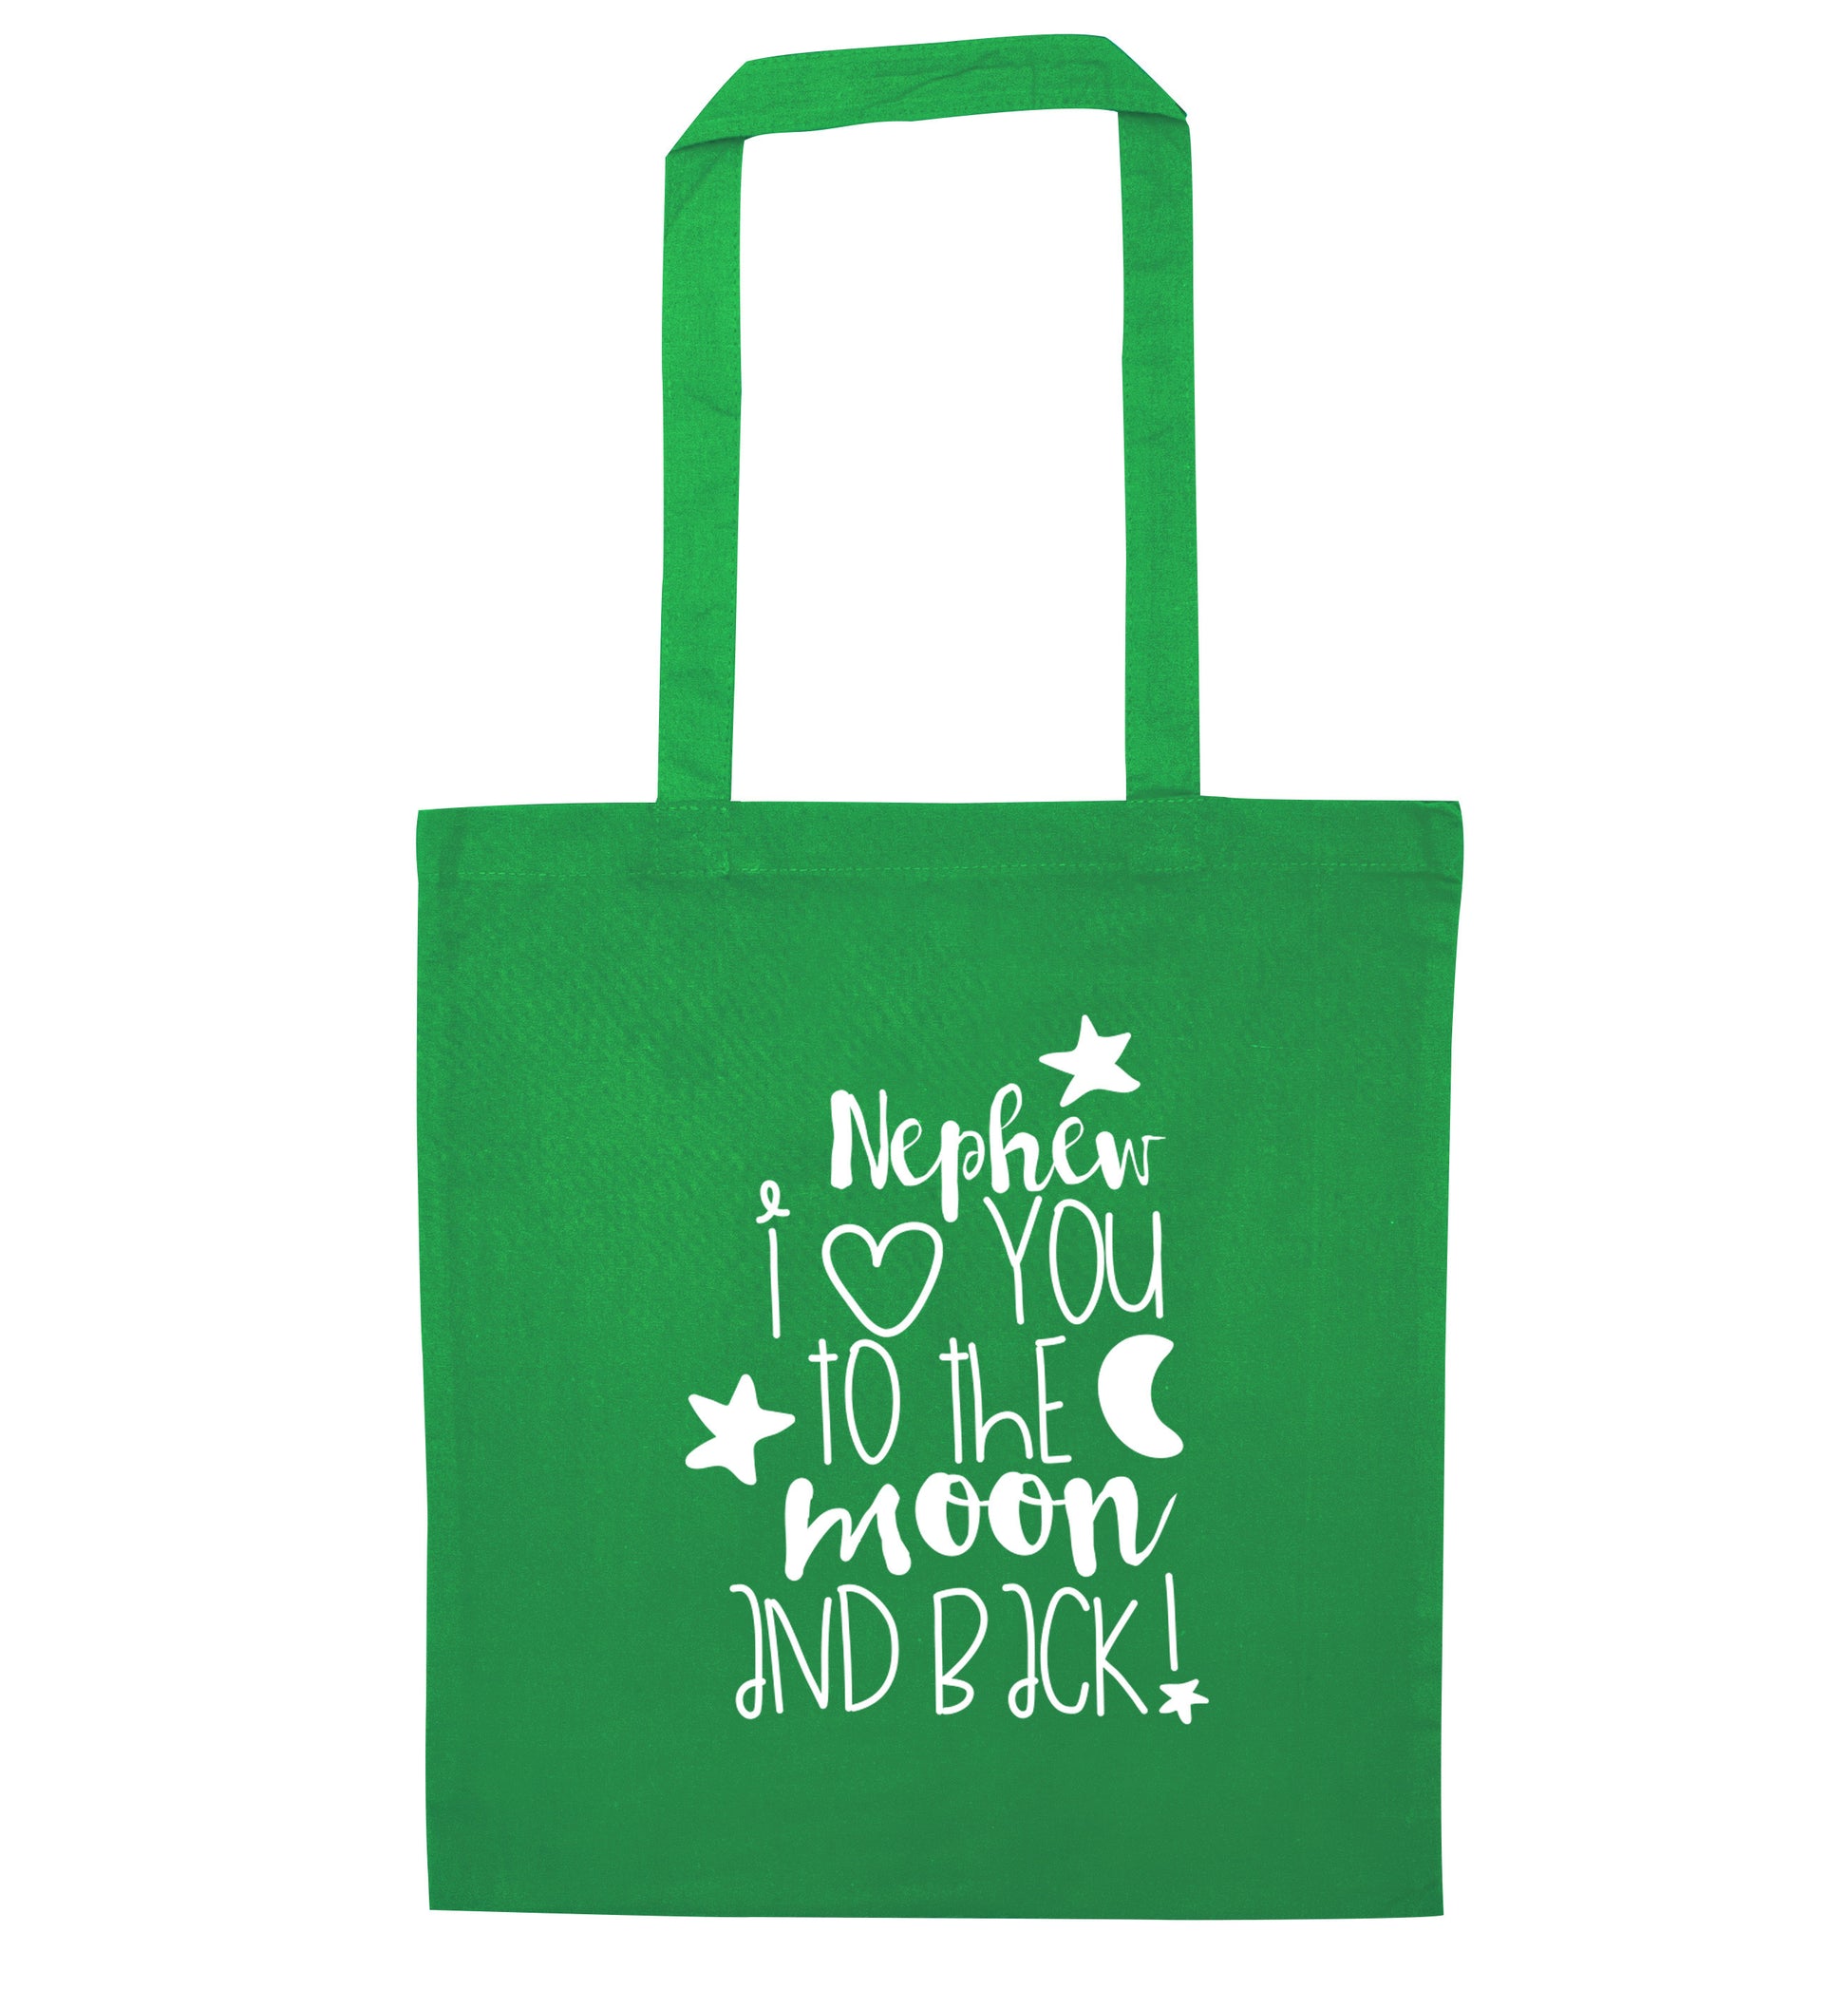 Nephew I love you to the moon and back green tote bag